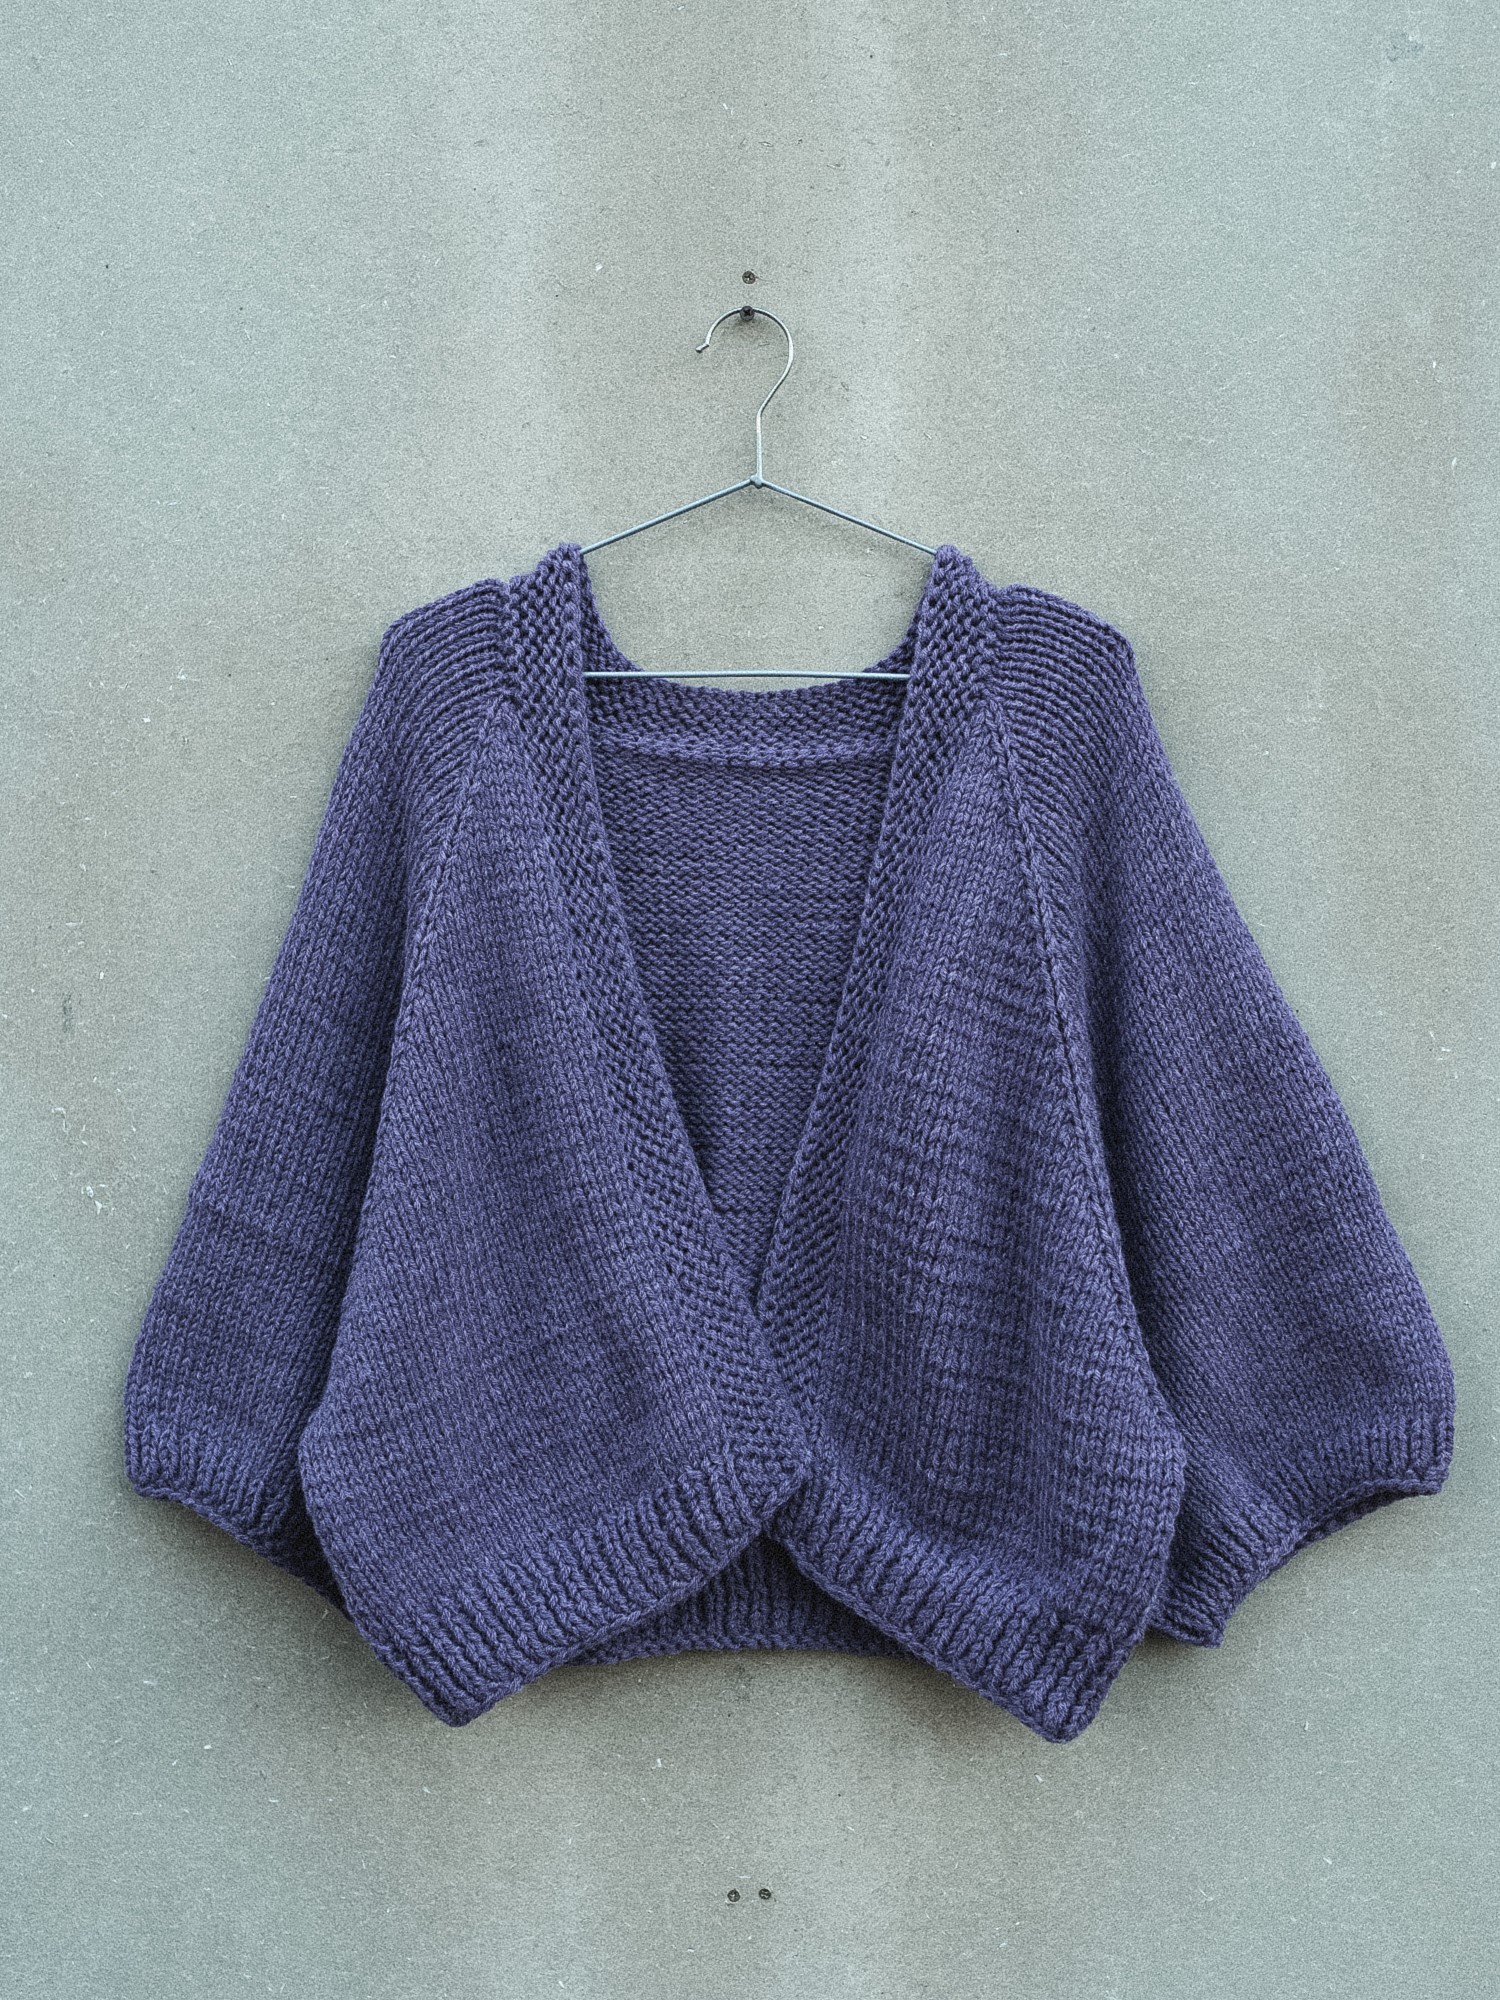 Unlock Your Creativity: Why Every Knitter Should Try the Enchanting Butterfly Cardigan